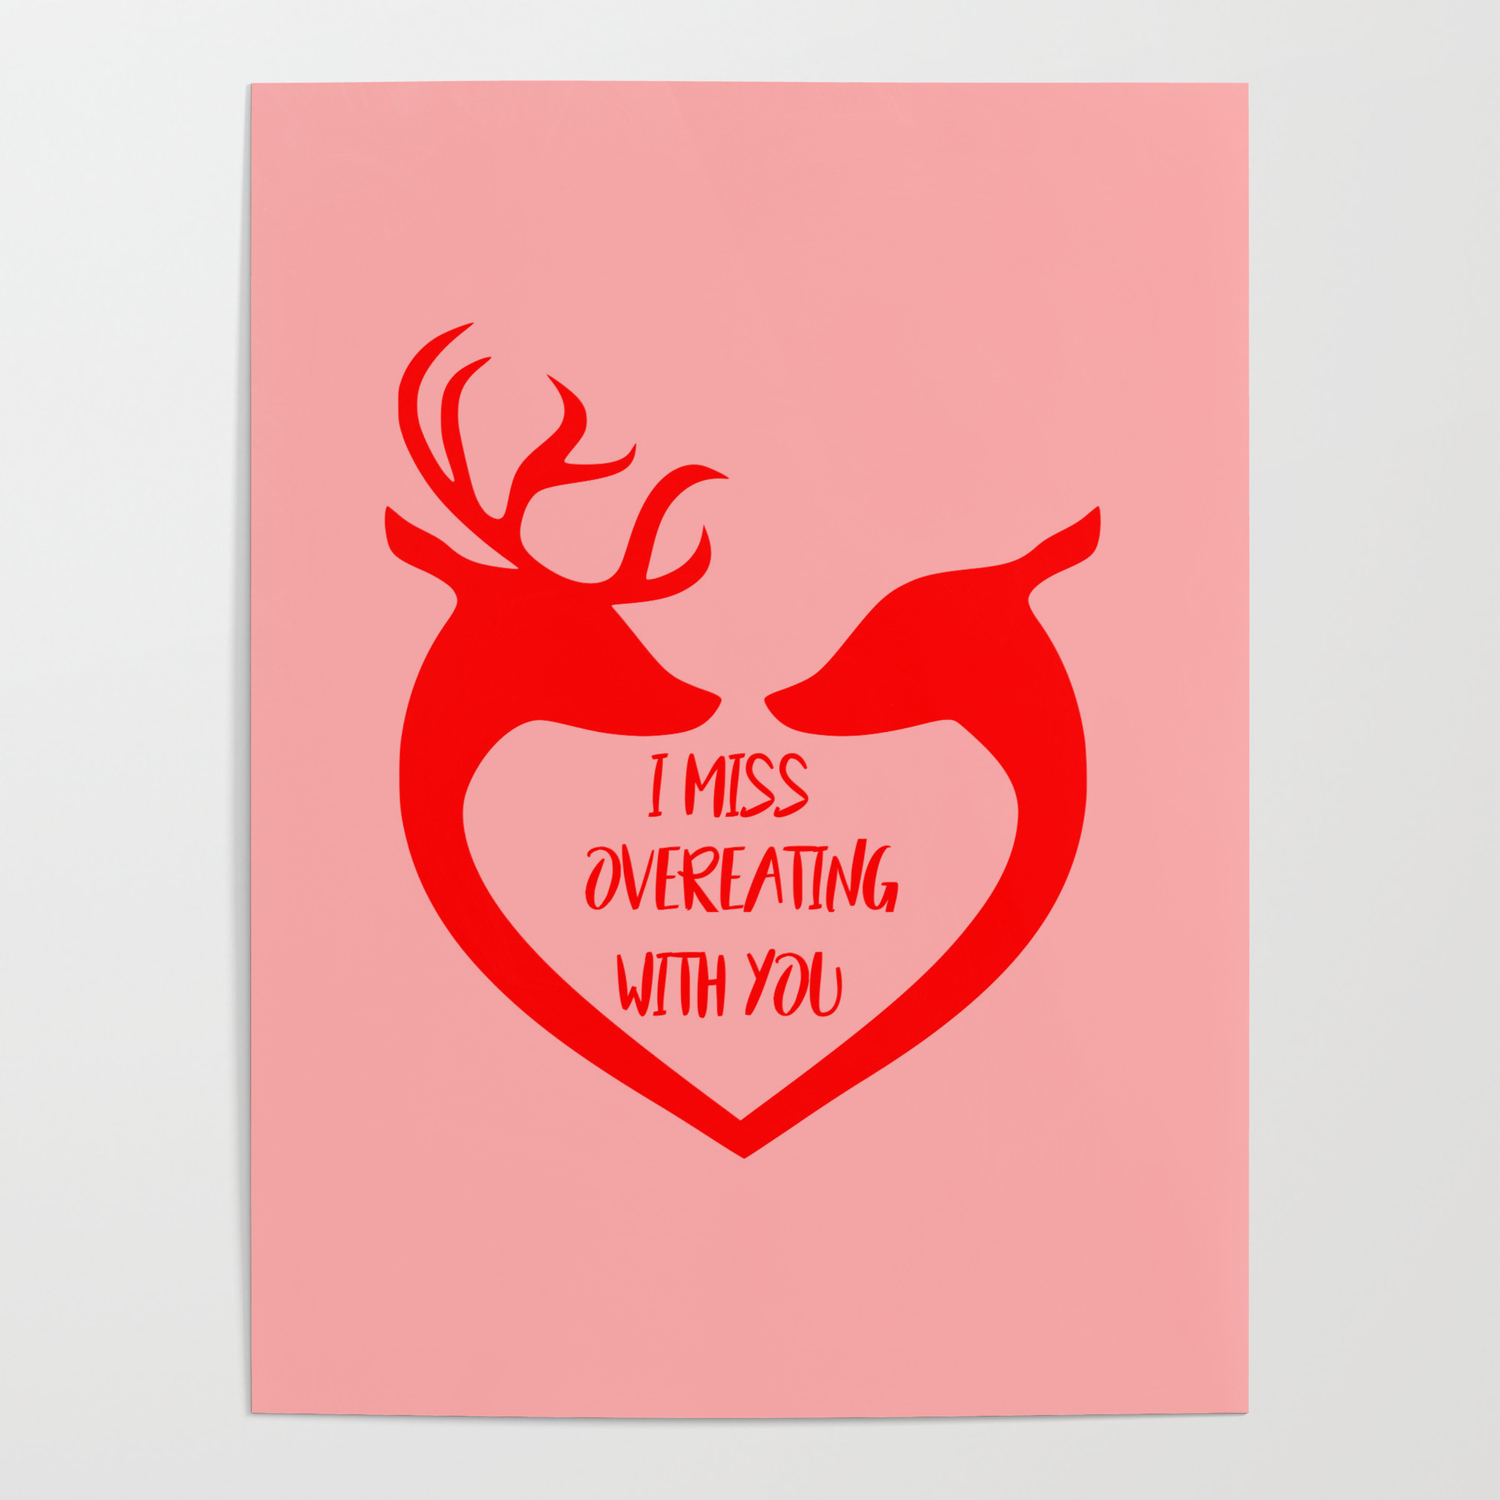 I miss overeating with you funny quote Poster by WordArt | Society6